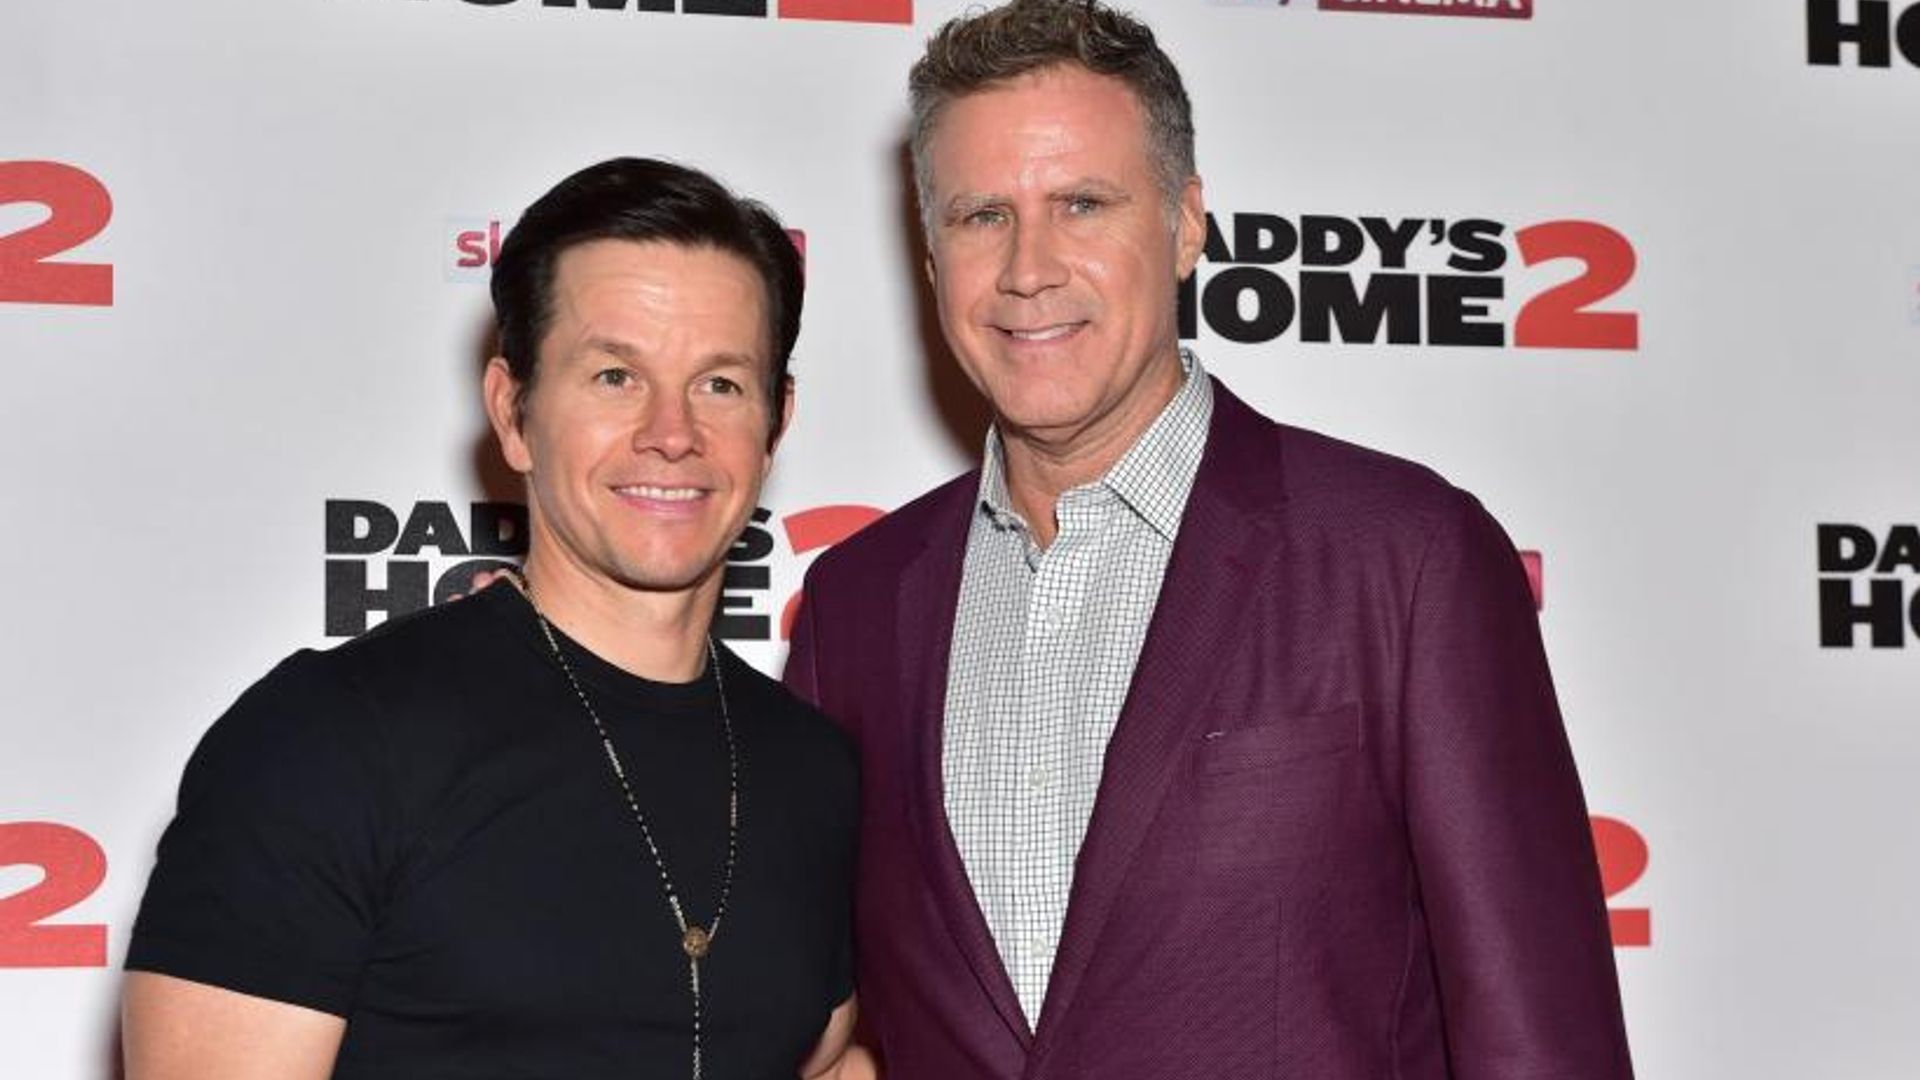 Will Ferrell and Mark Wahlberg joke about romance between their children